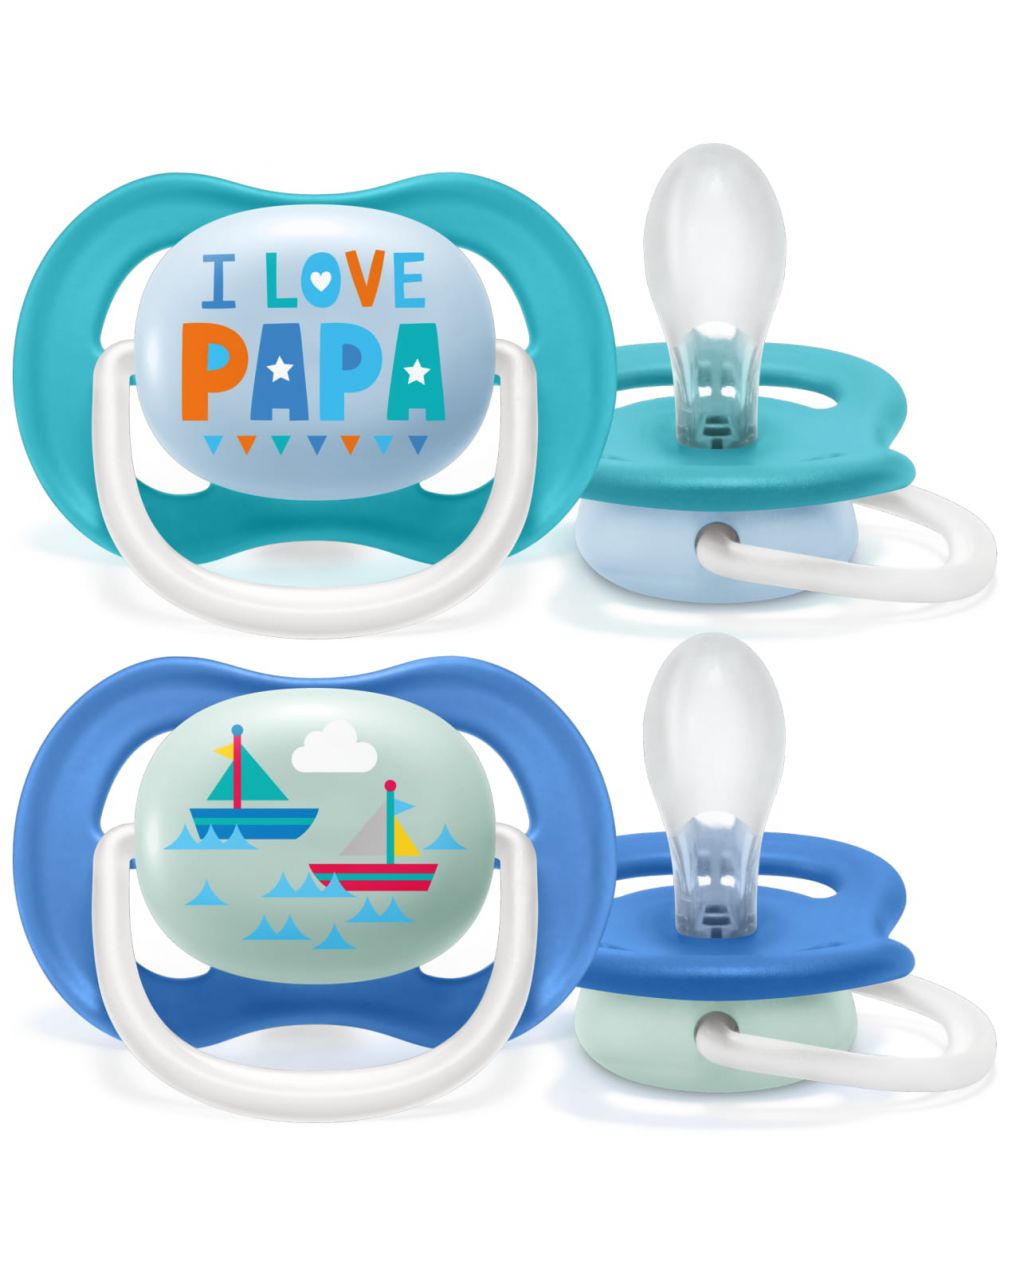 CHUPETE PHILIPS AVENT ULTRA AIR 0-6 MESES PACK 2